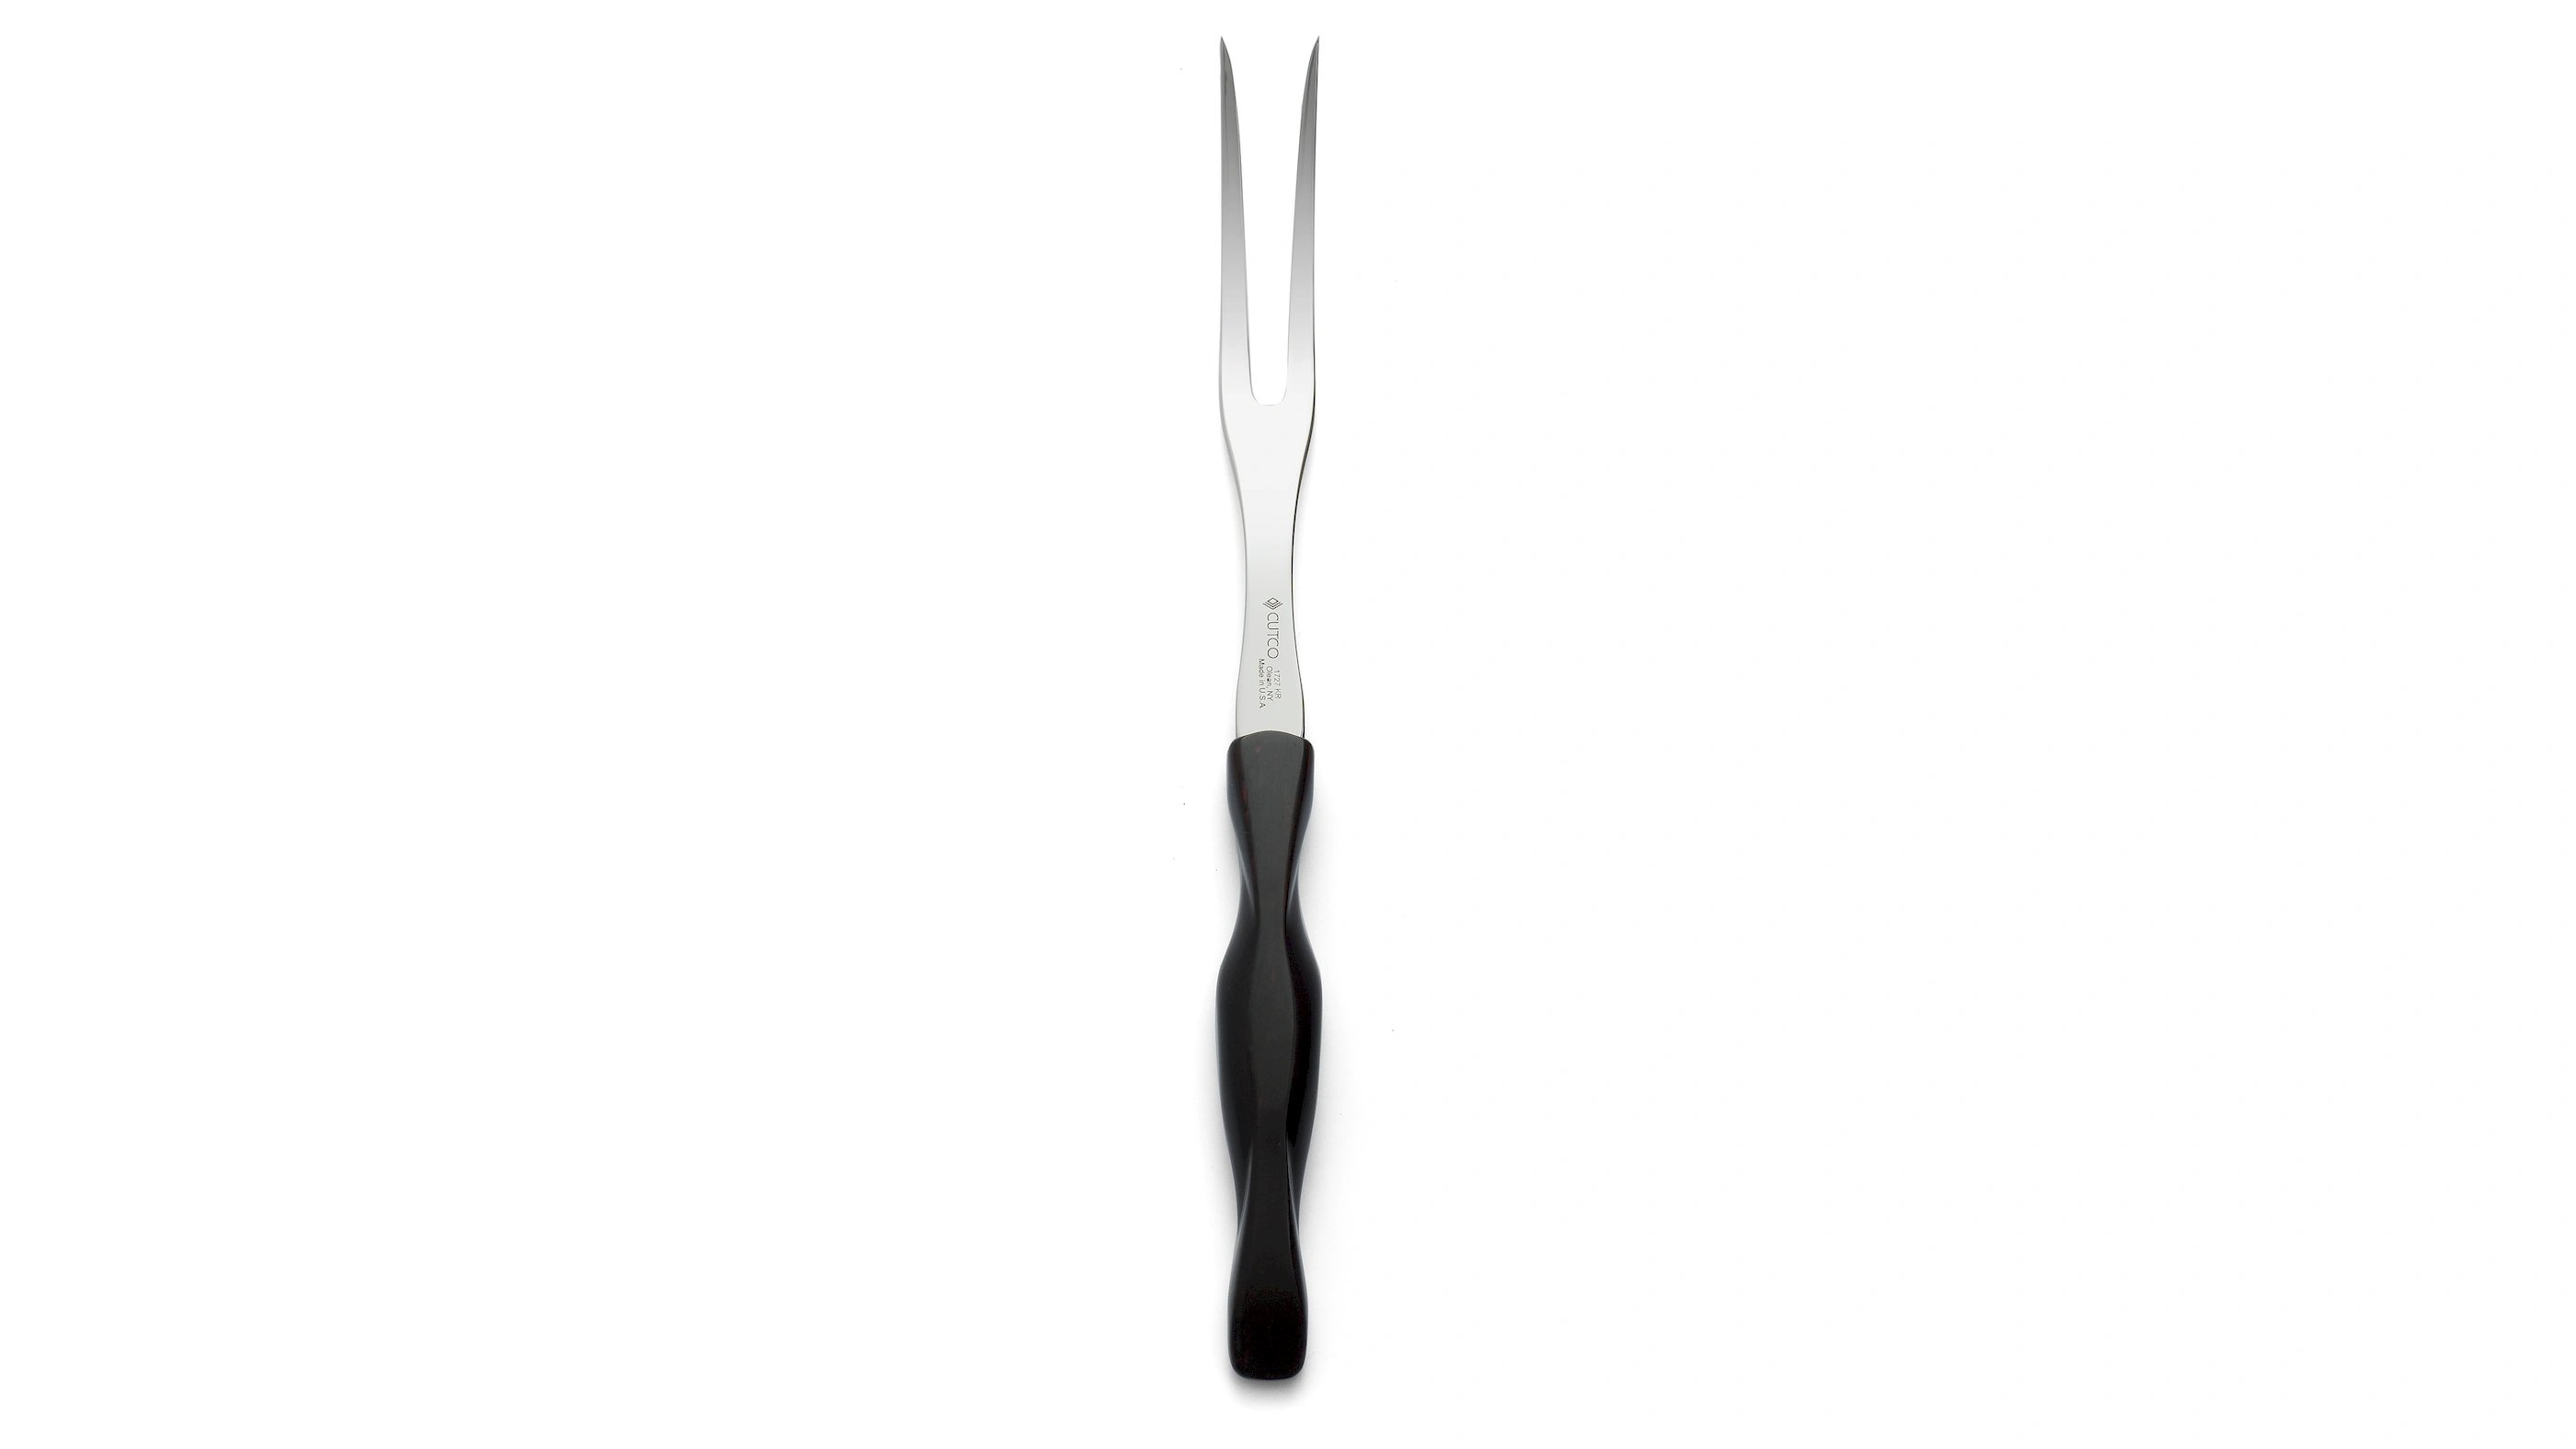 Buy the Cutco #1724 Steak Knife and Unbranded Carving Fork